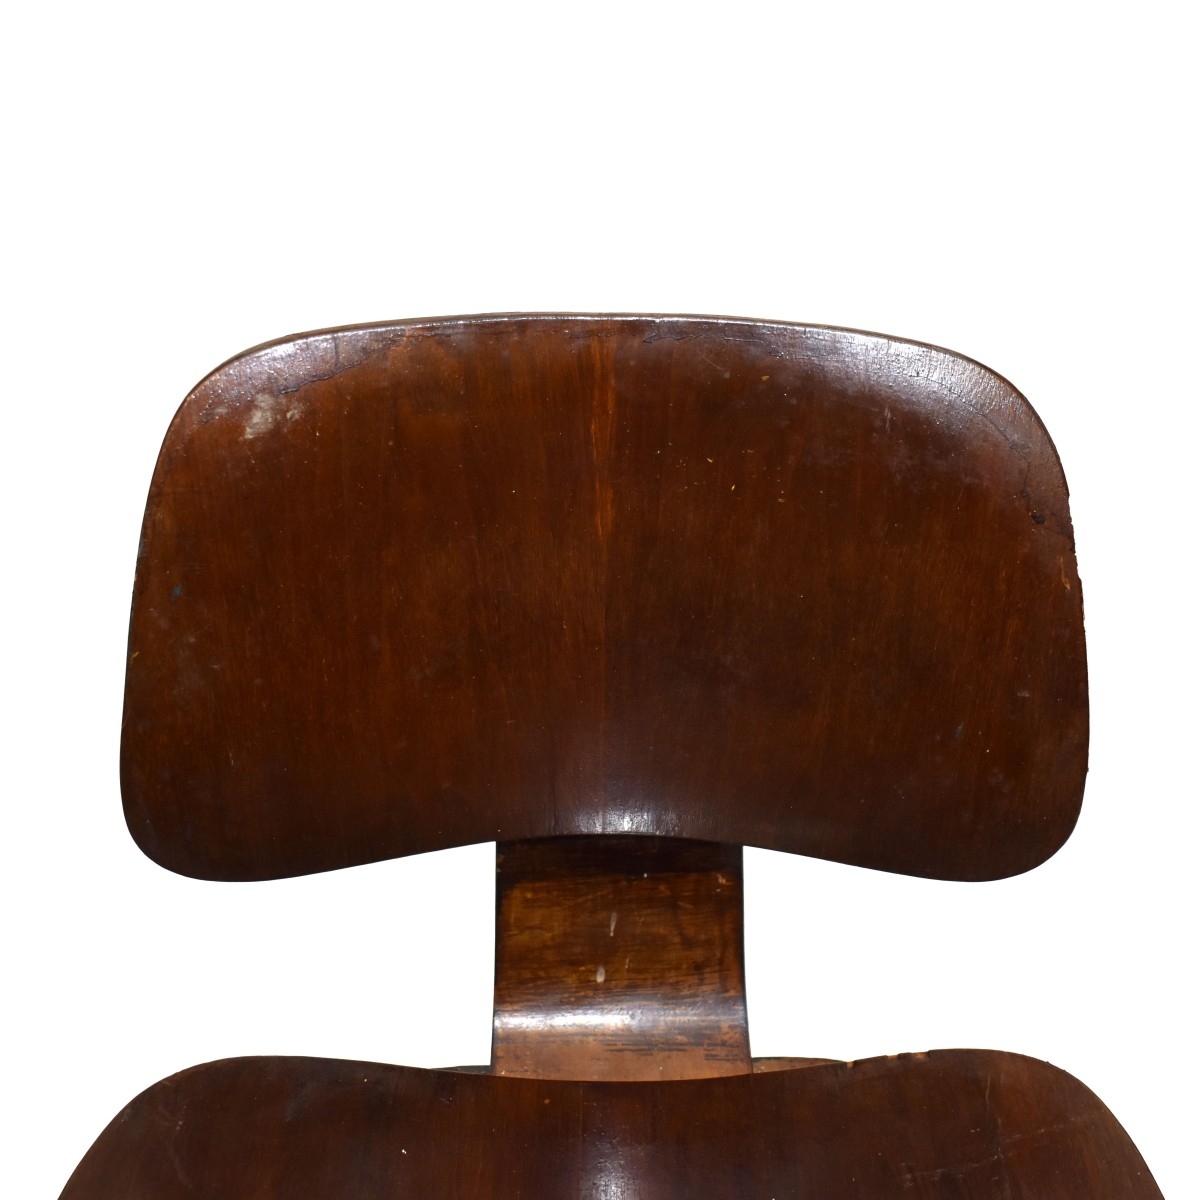 Eames DCW 1940's Dining Chairs